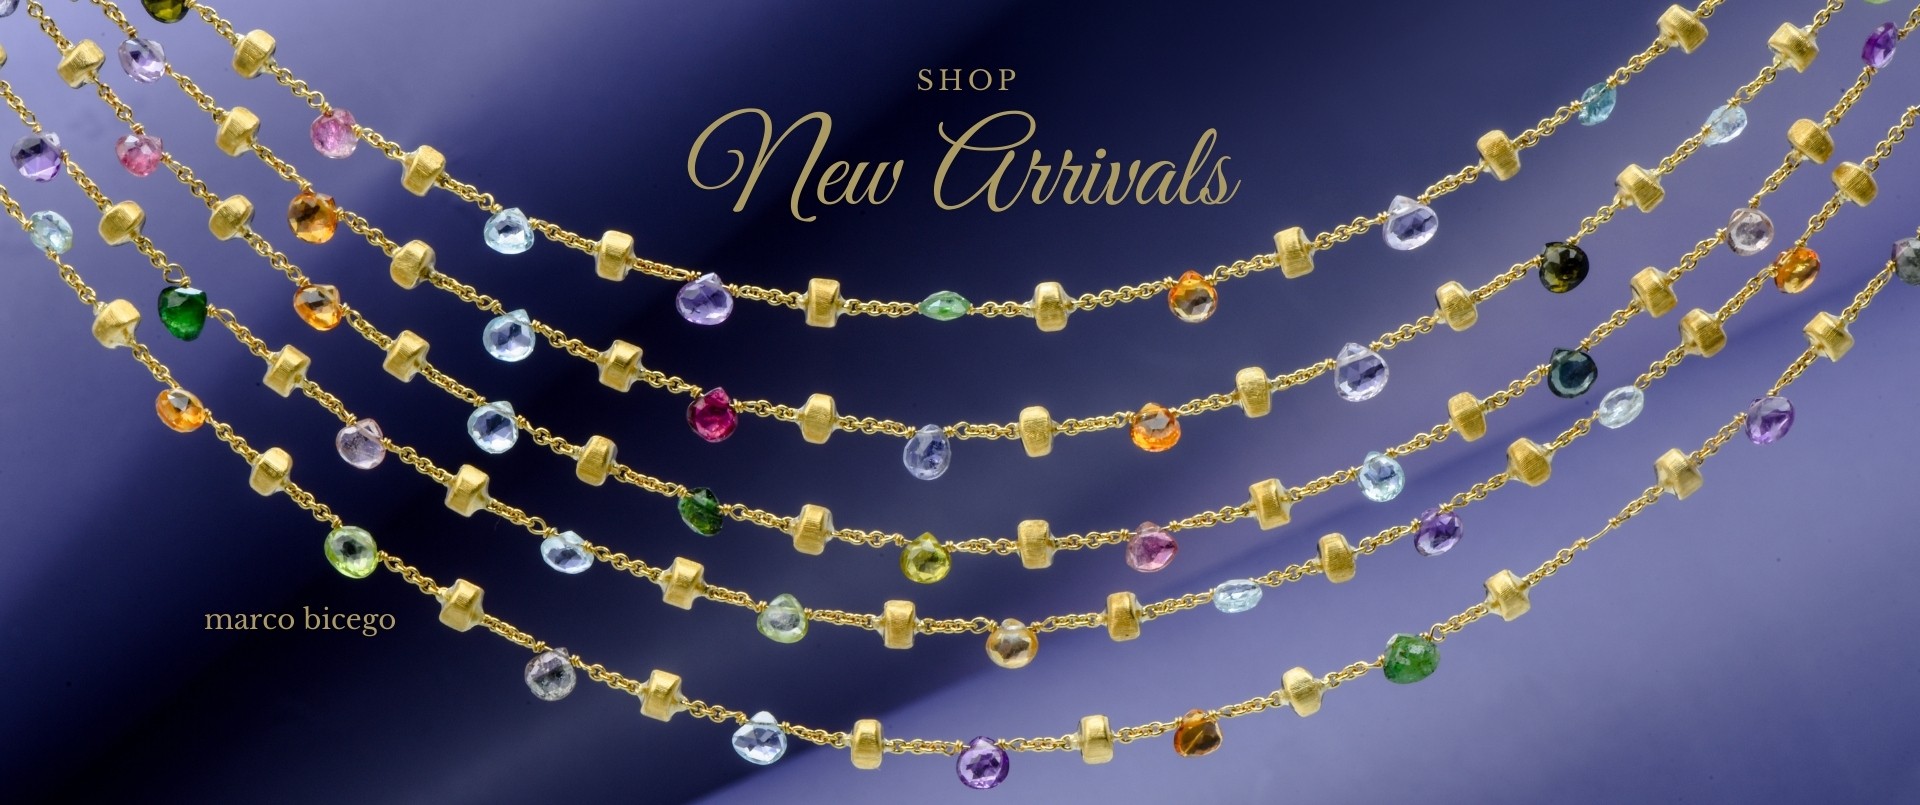 October New Arrivals l Dover Jewelry